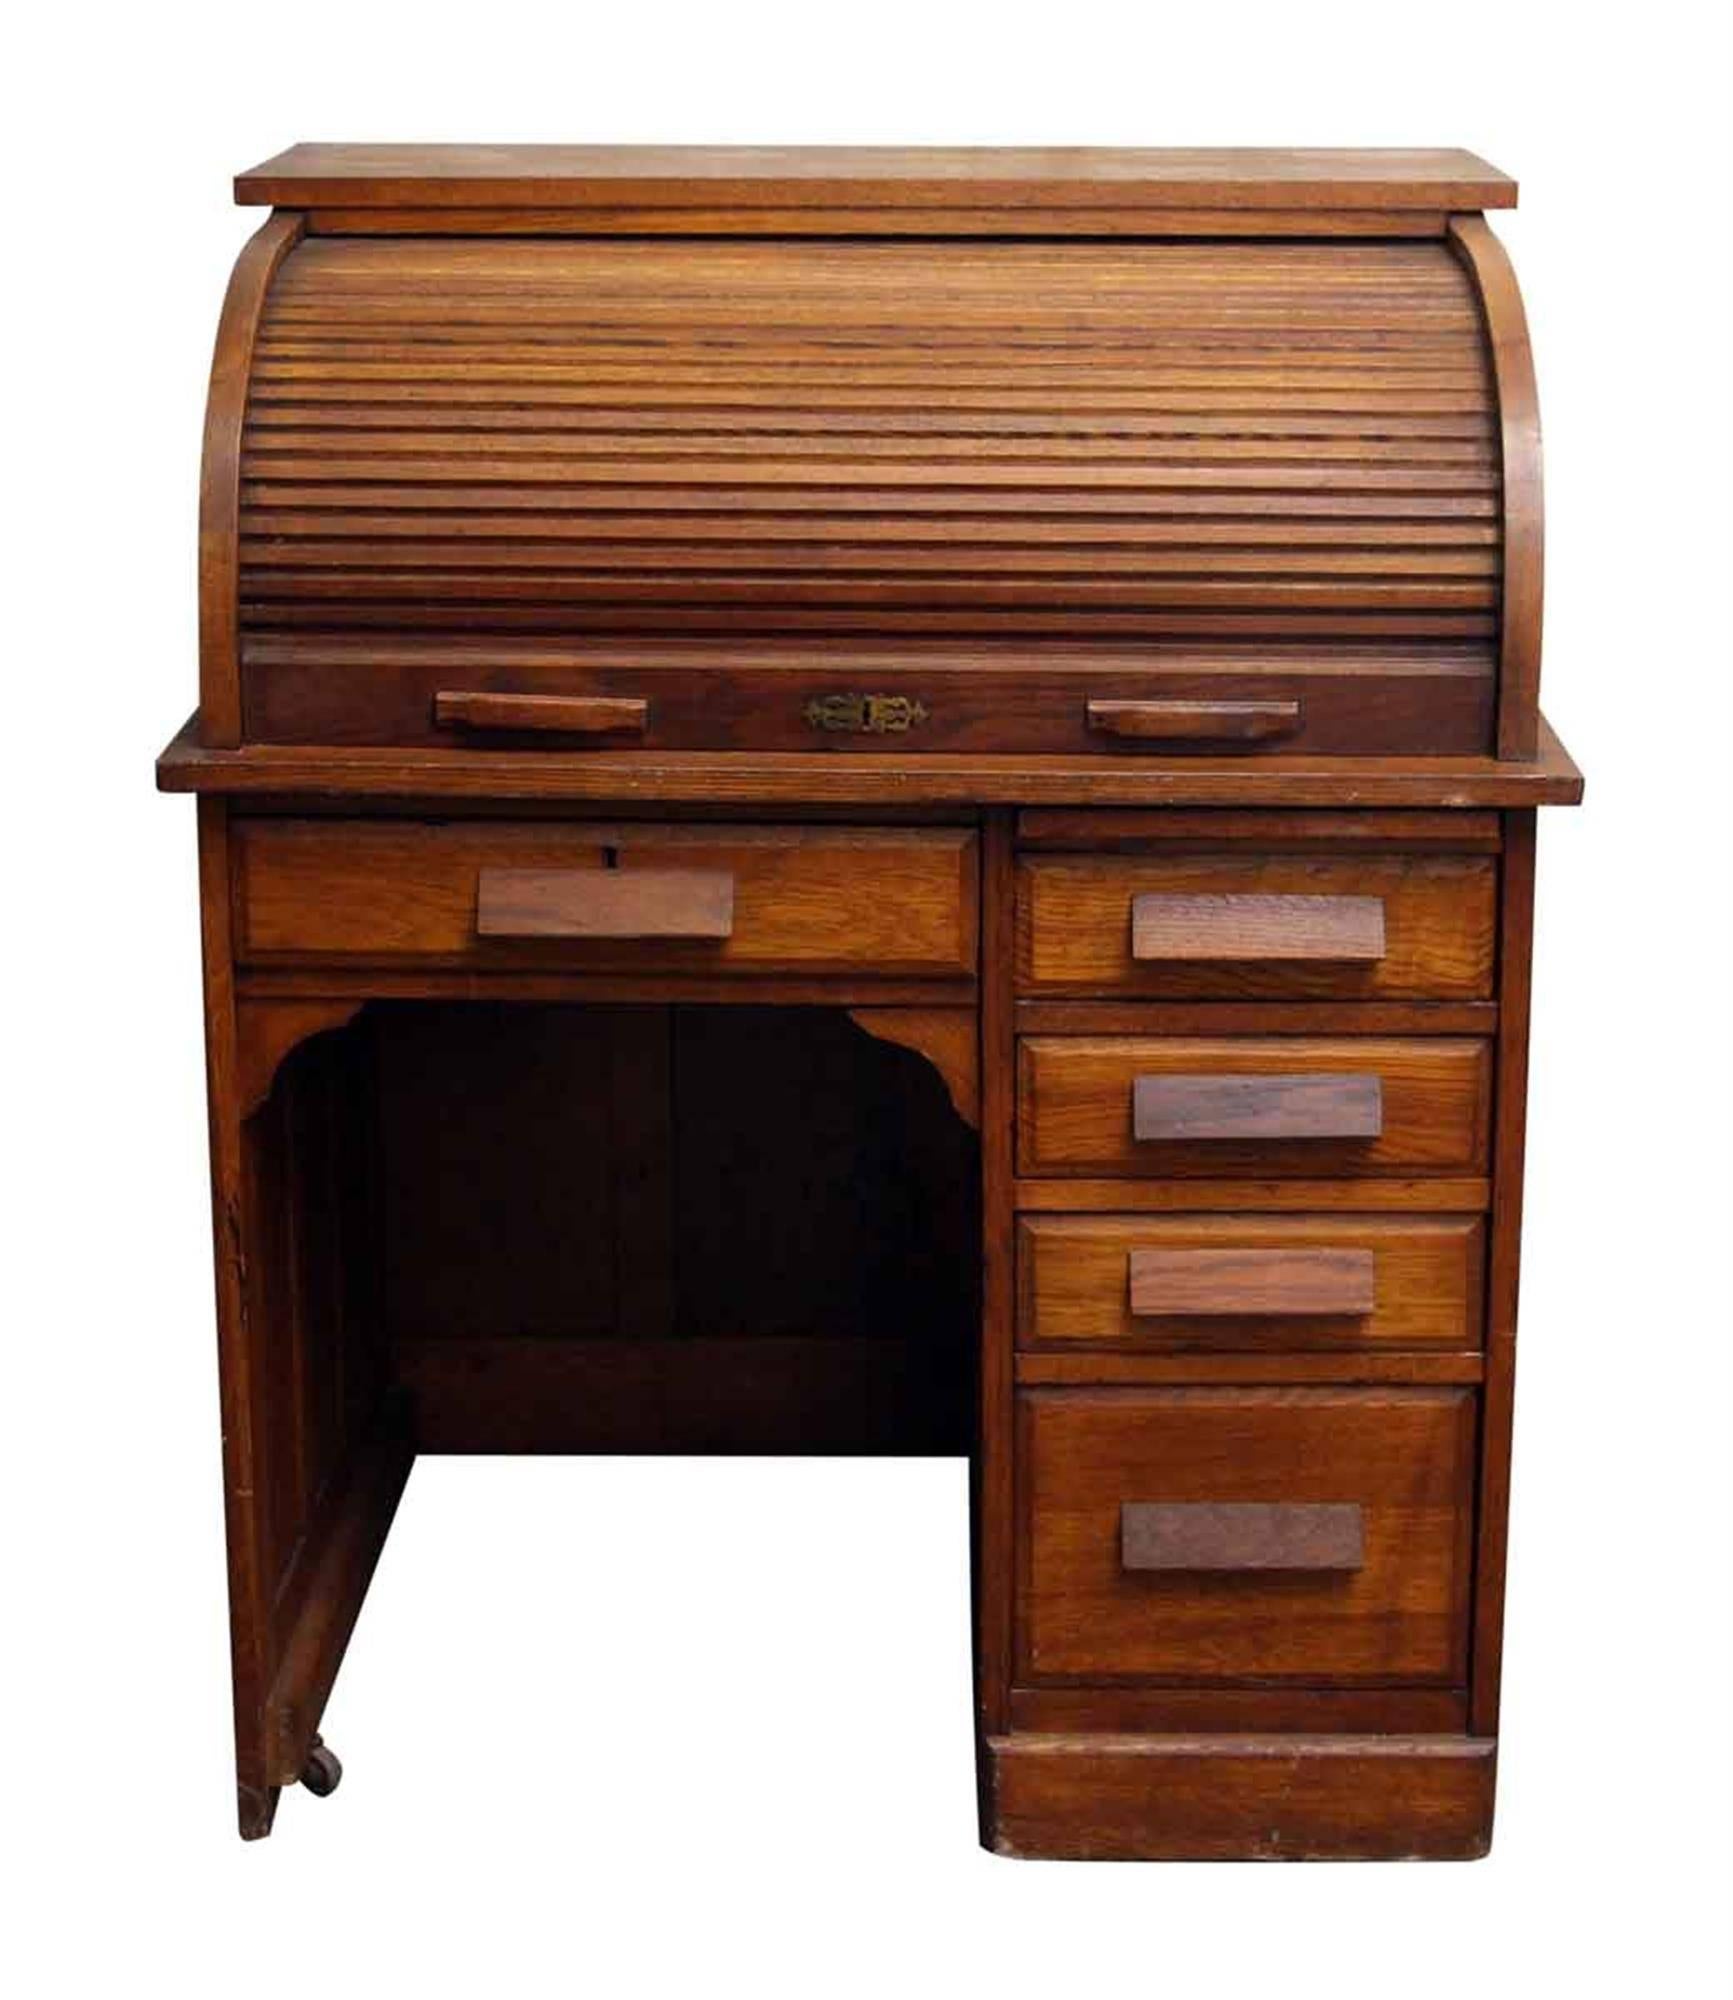 1920s solid oak roll top desk with recessed panels on the sides and back. Five drawers with wide solid oak handles. The front has a bronze keyhole escutcheon. Key is not included. This can be seen at our 2420 Broadway location on the upper west side